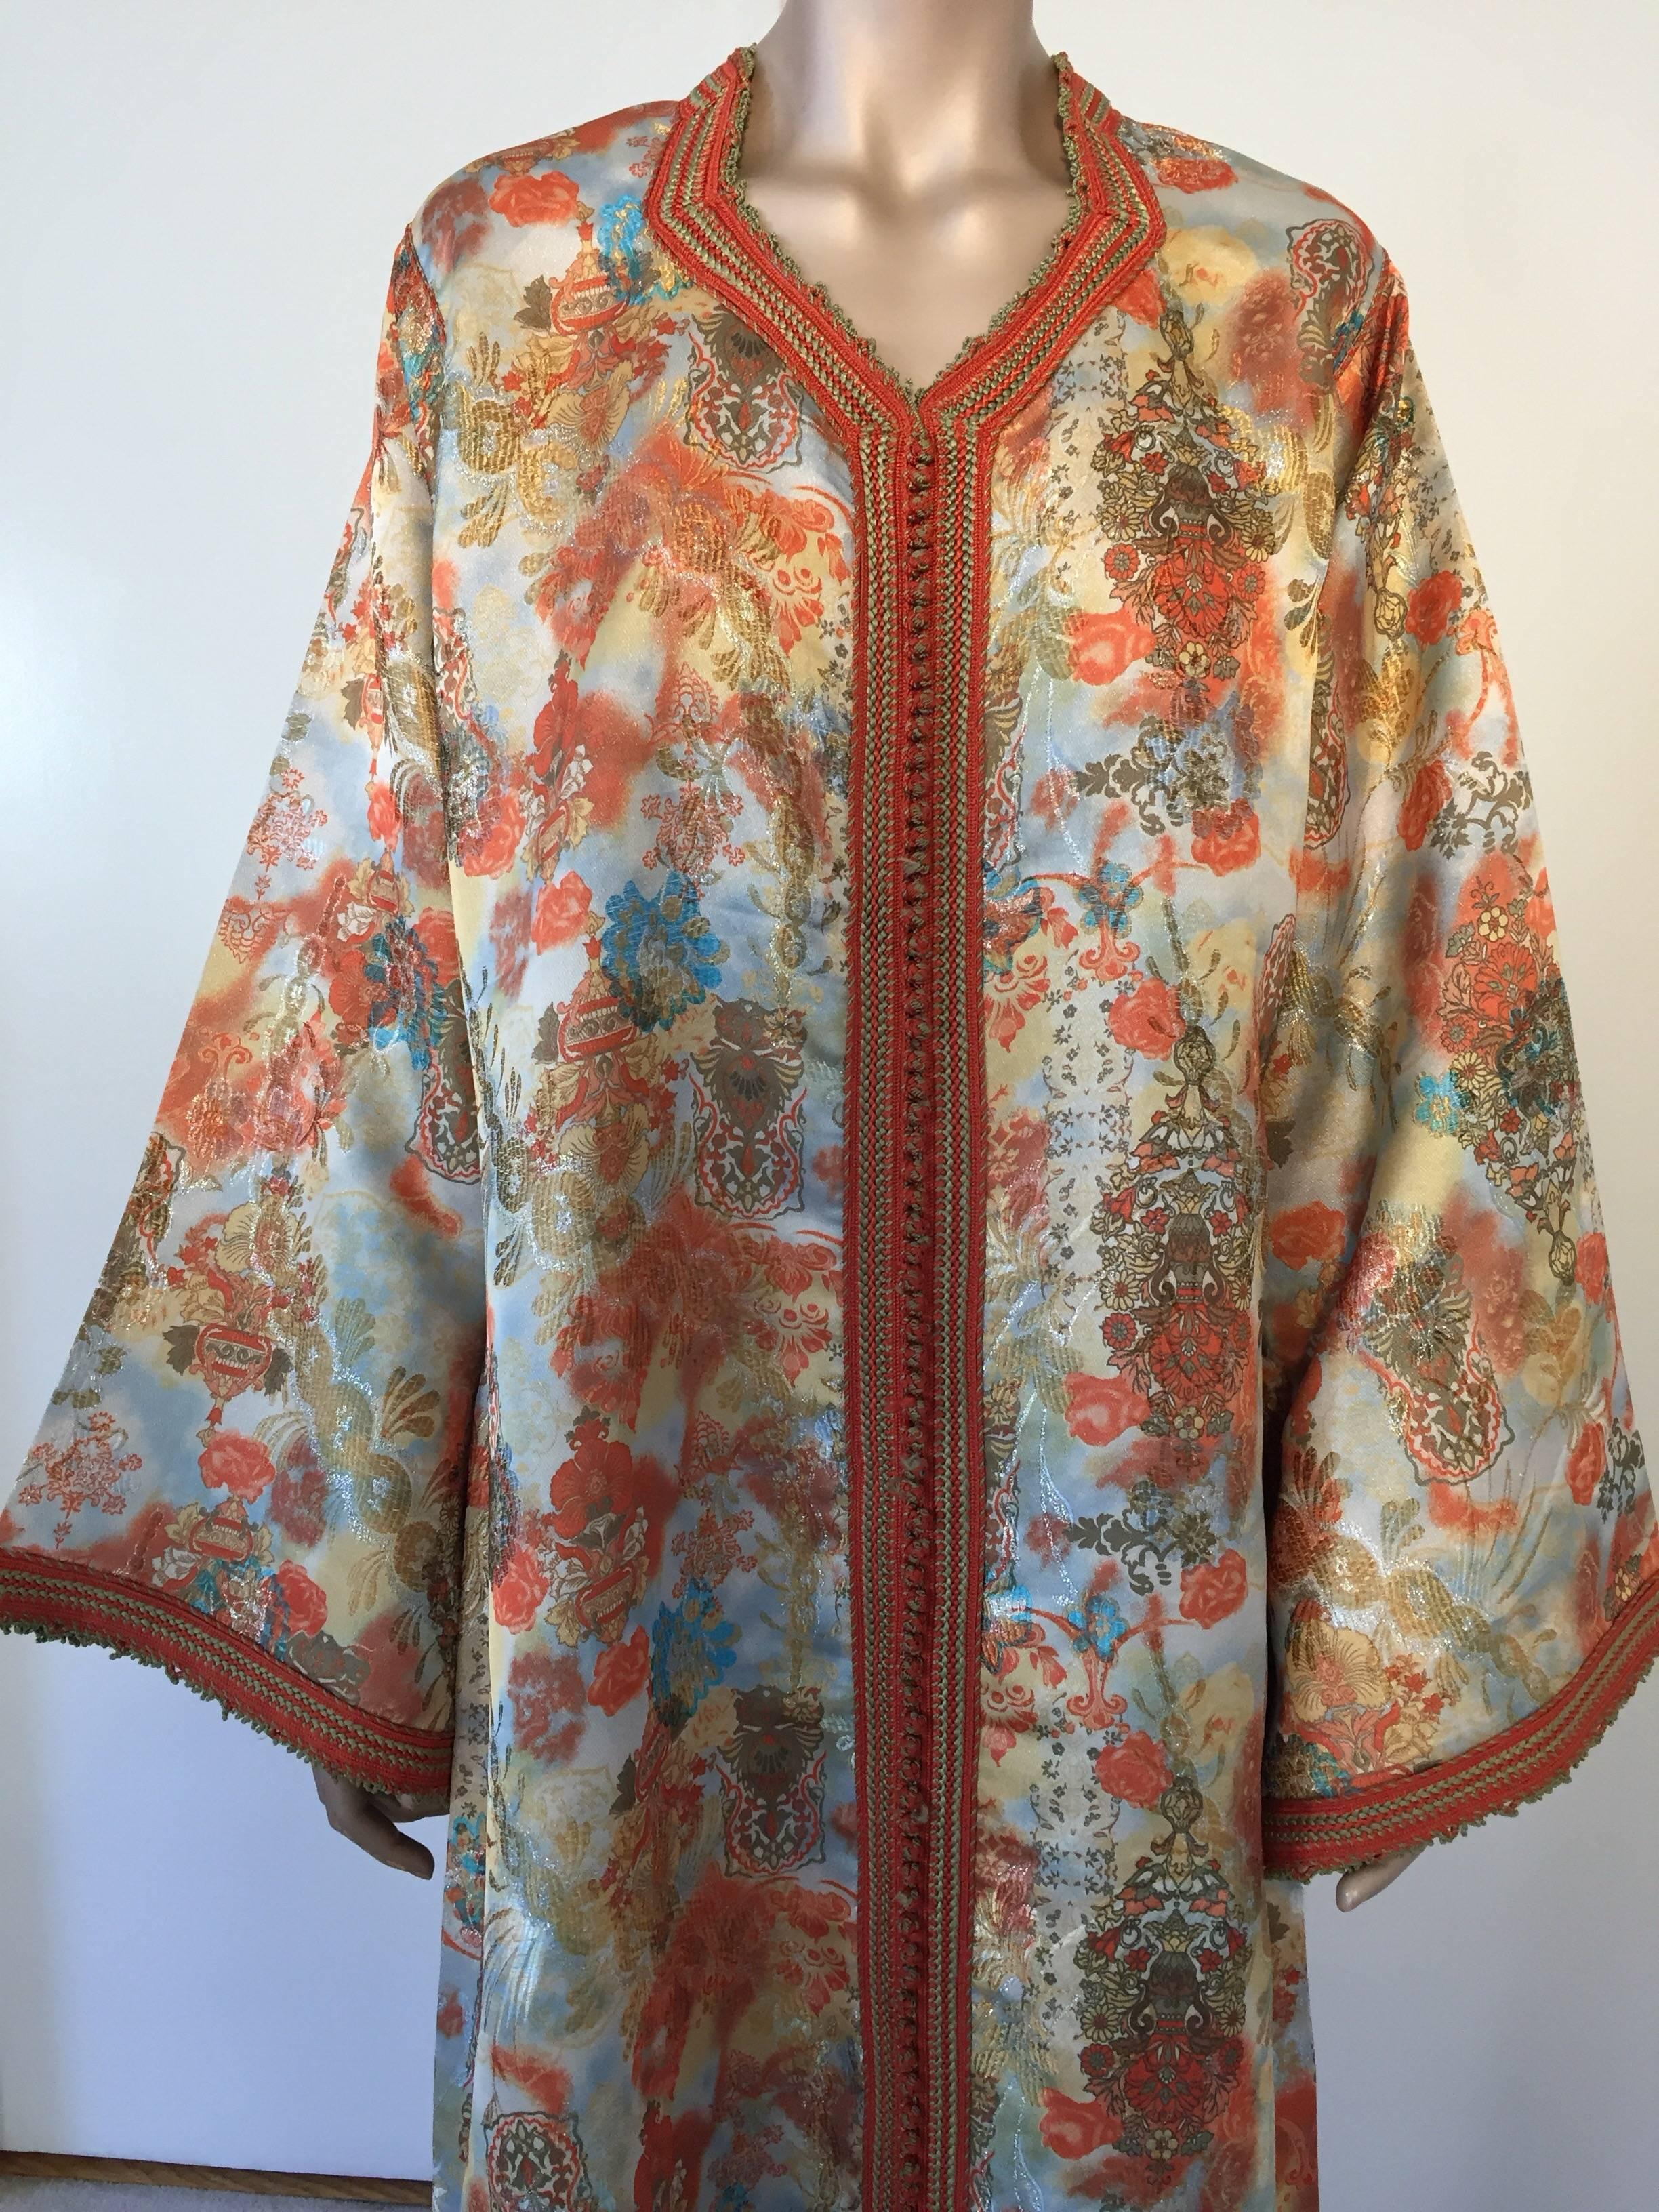 Gorgeous vintage hostess gown, floral multicolored brocade Kaftan, circa 1970s.
Exotic oriental floral long maxi caftan dress with wide arm and long sleeves in shimmering brocade fabric.
This Kaftan speaks for itself with its rich vibrant colors in